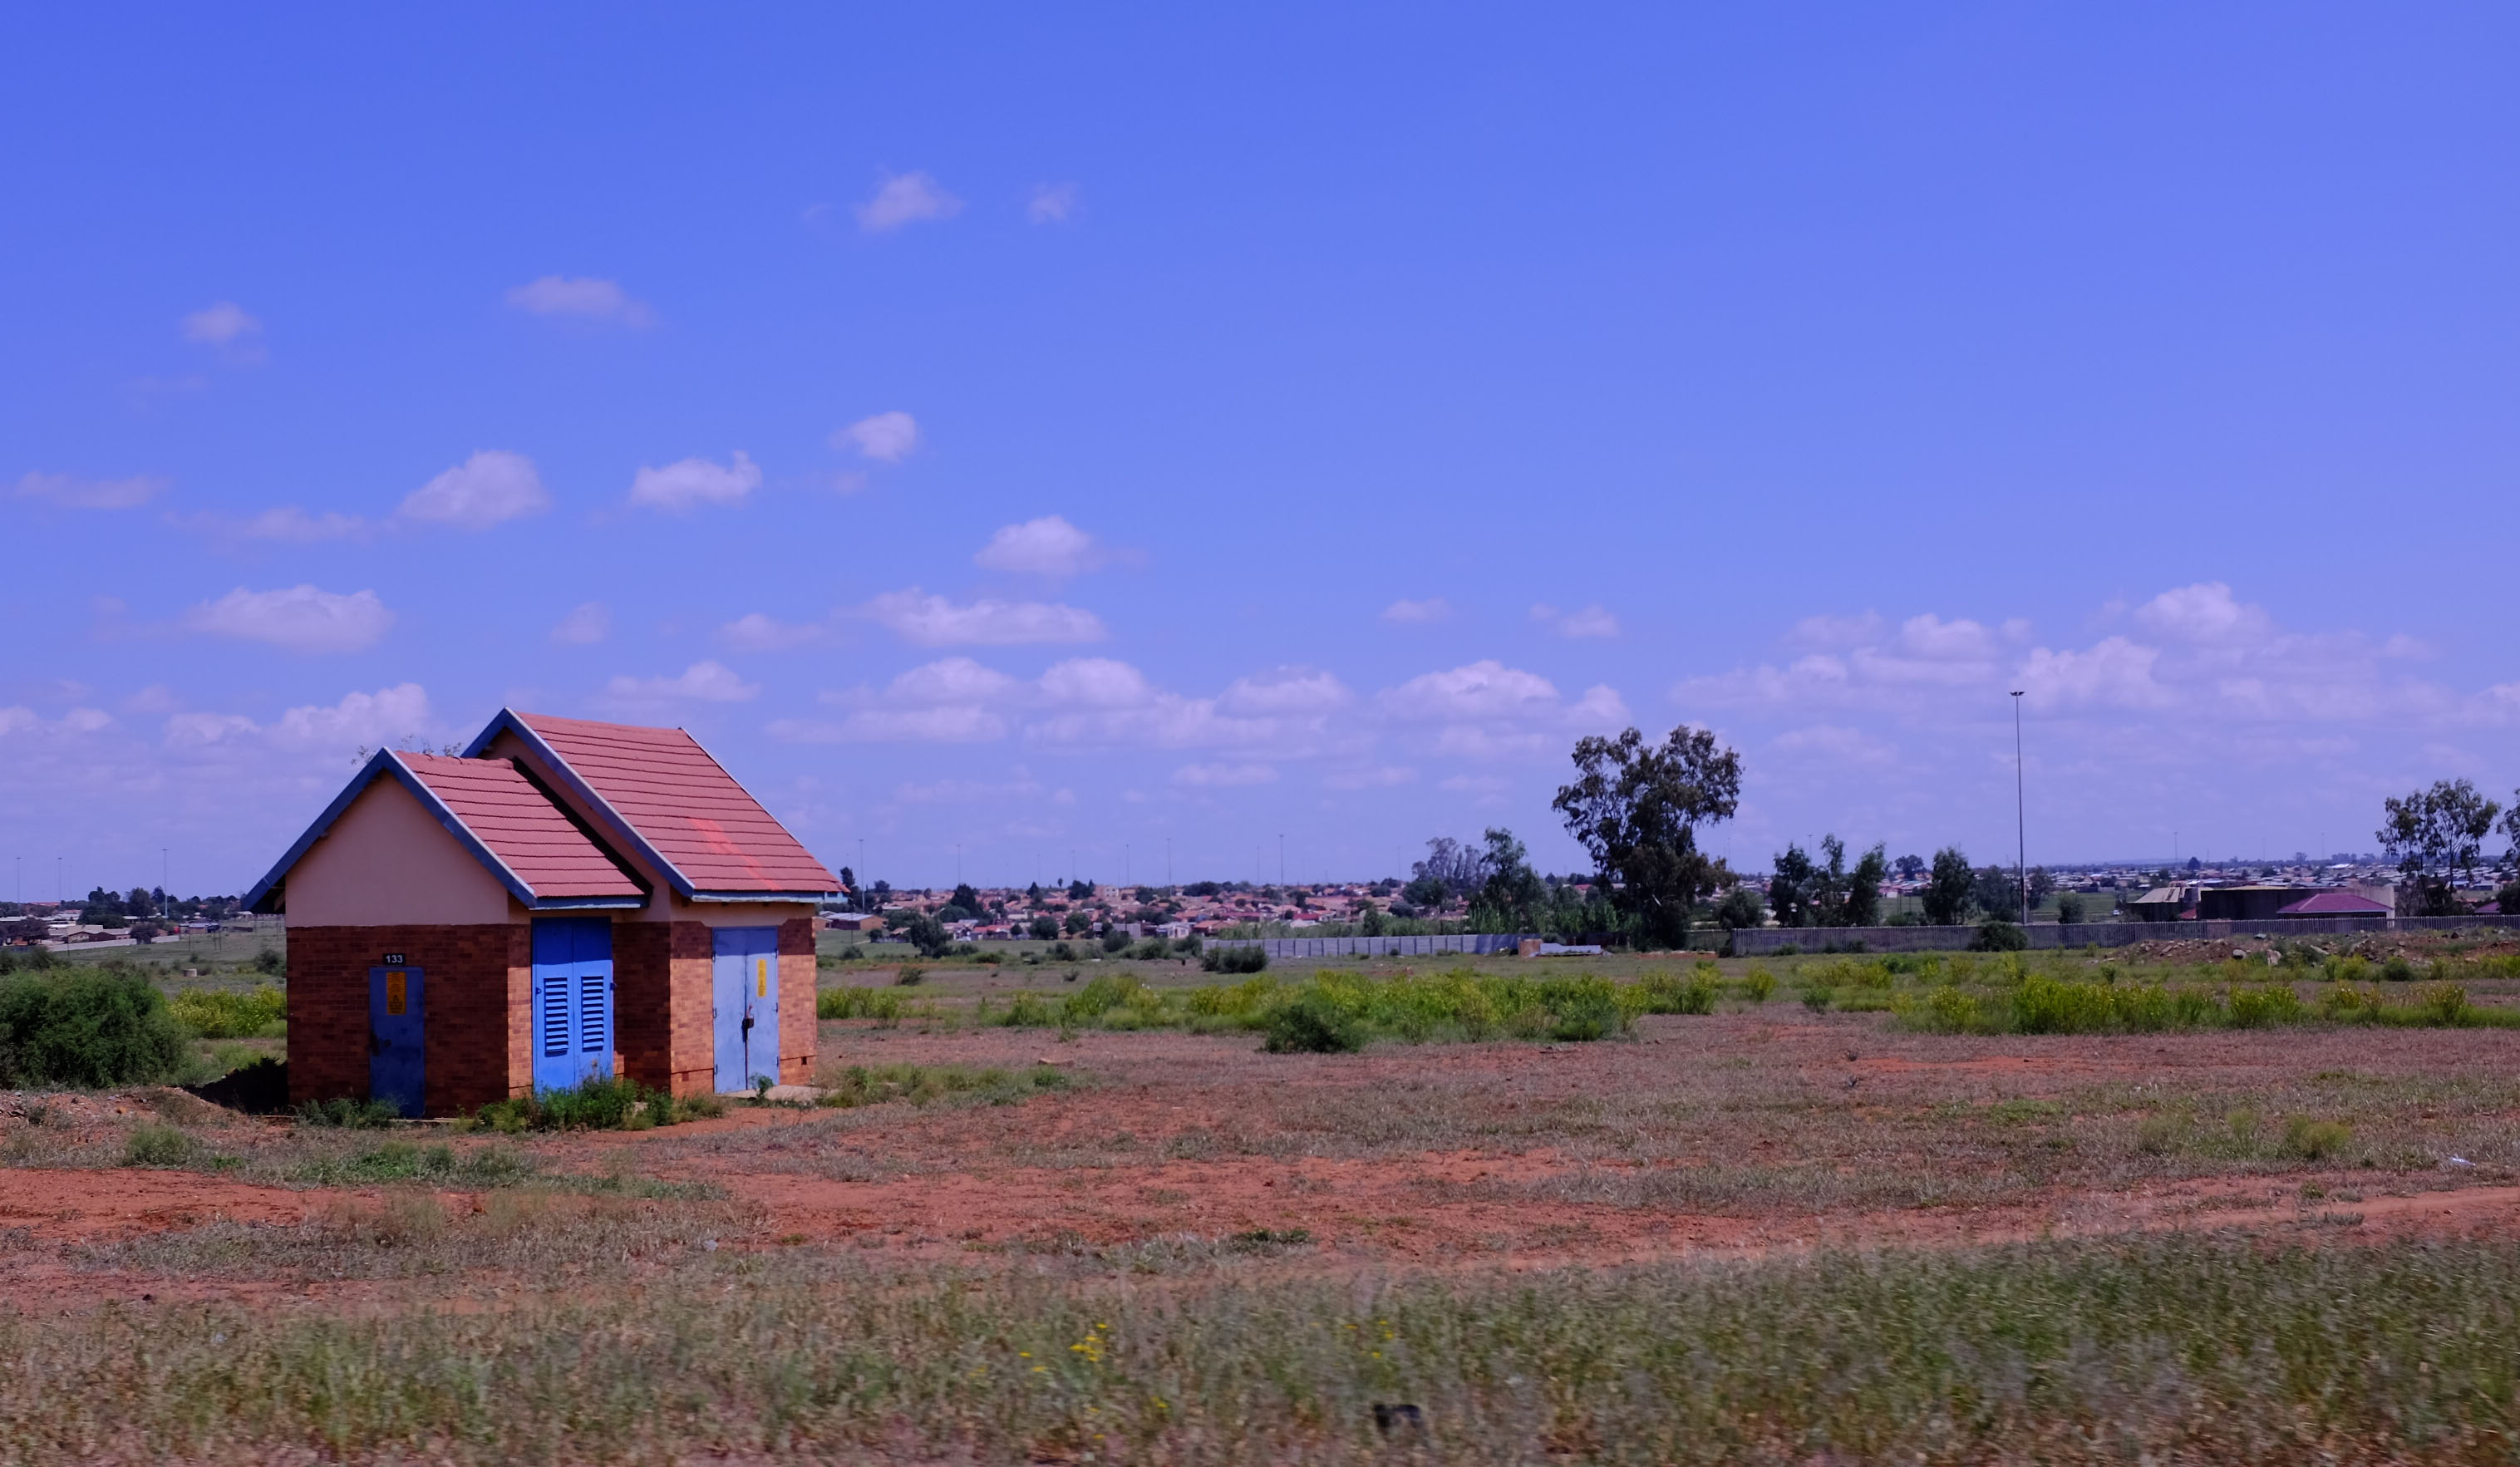 A small house on the South African plain